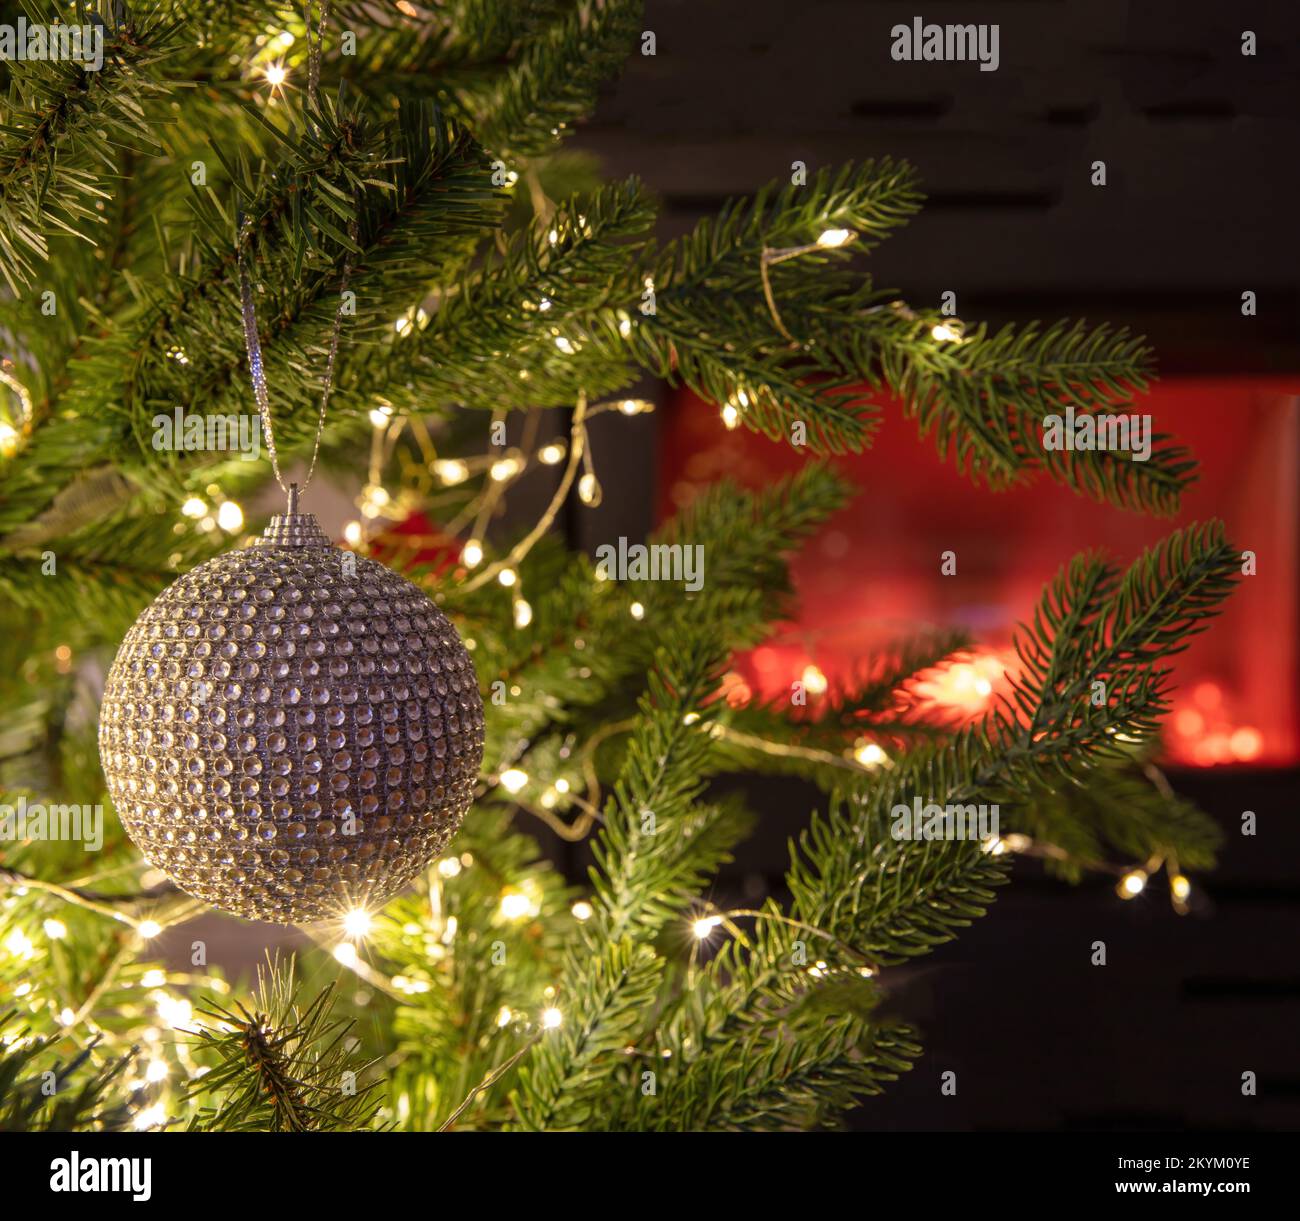 Christmas background. Xmas tree decoration bauble and lights close up view, burning fireplace, copy space. Stock Photo